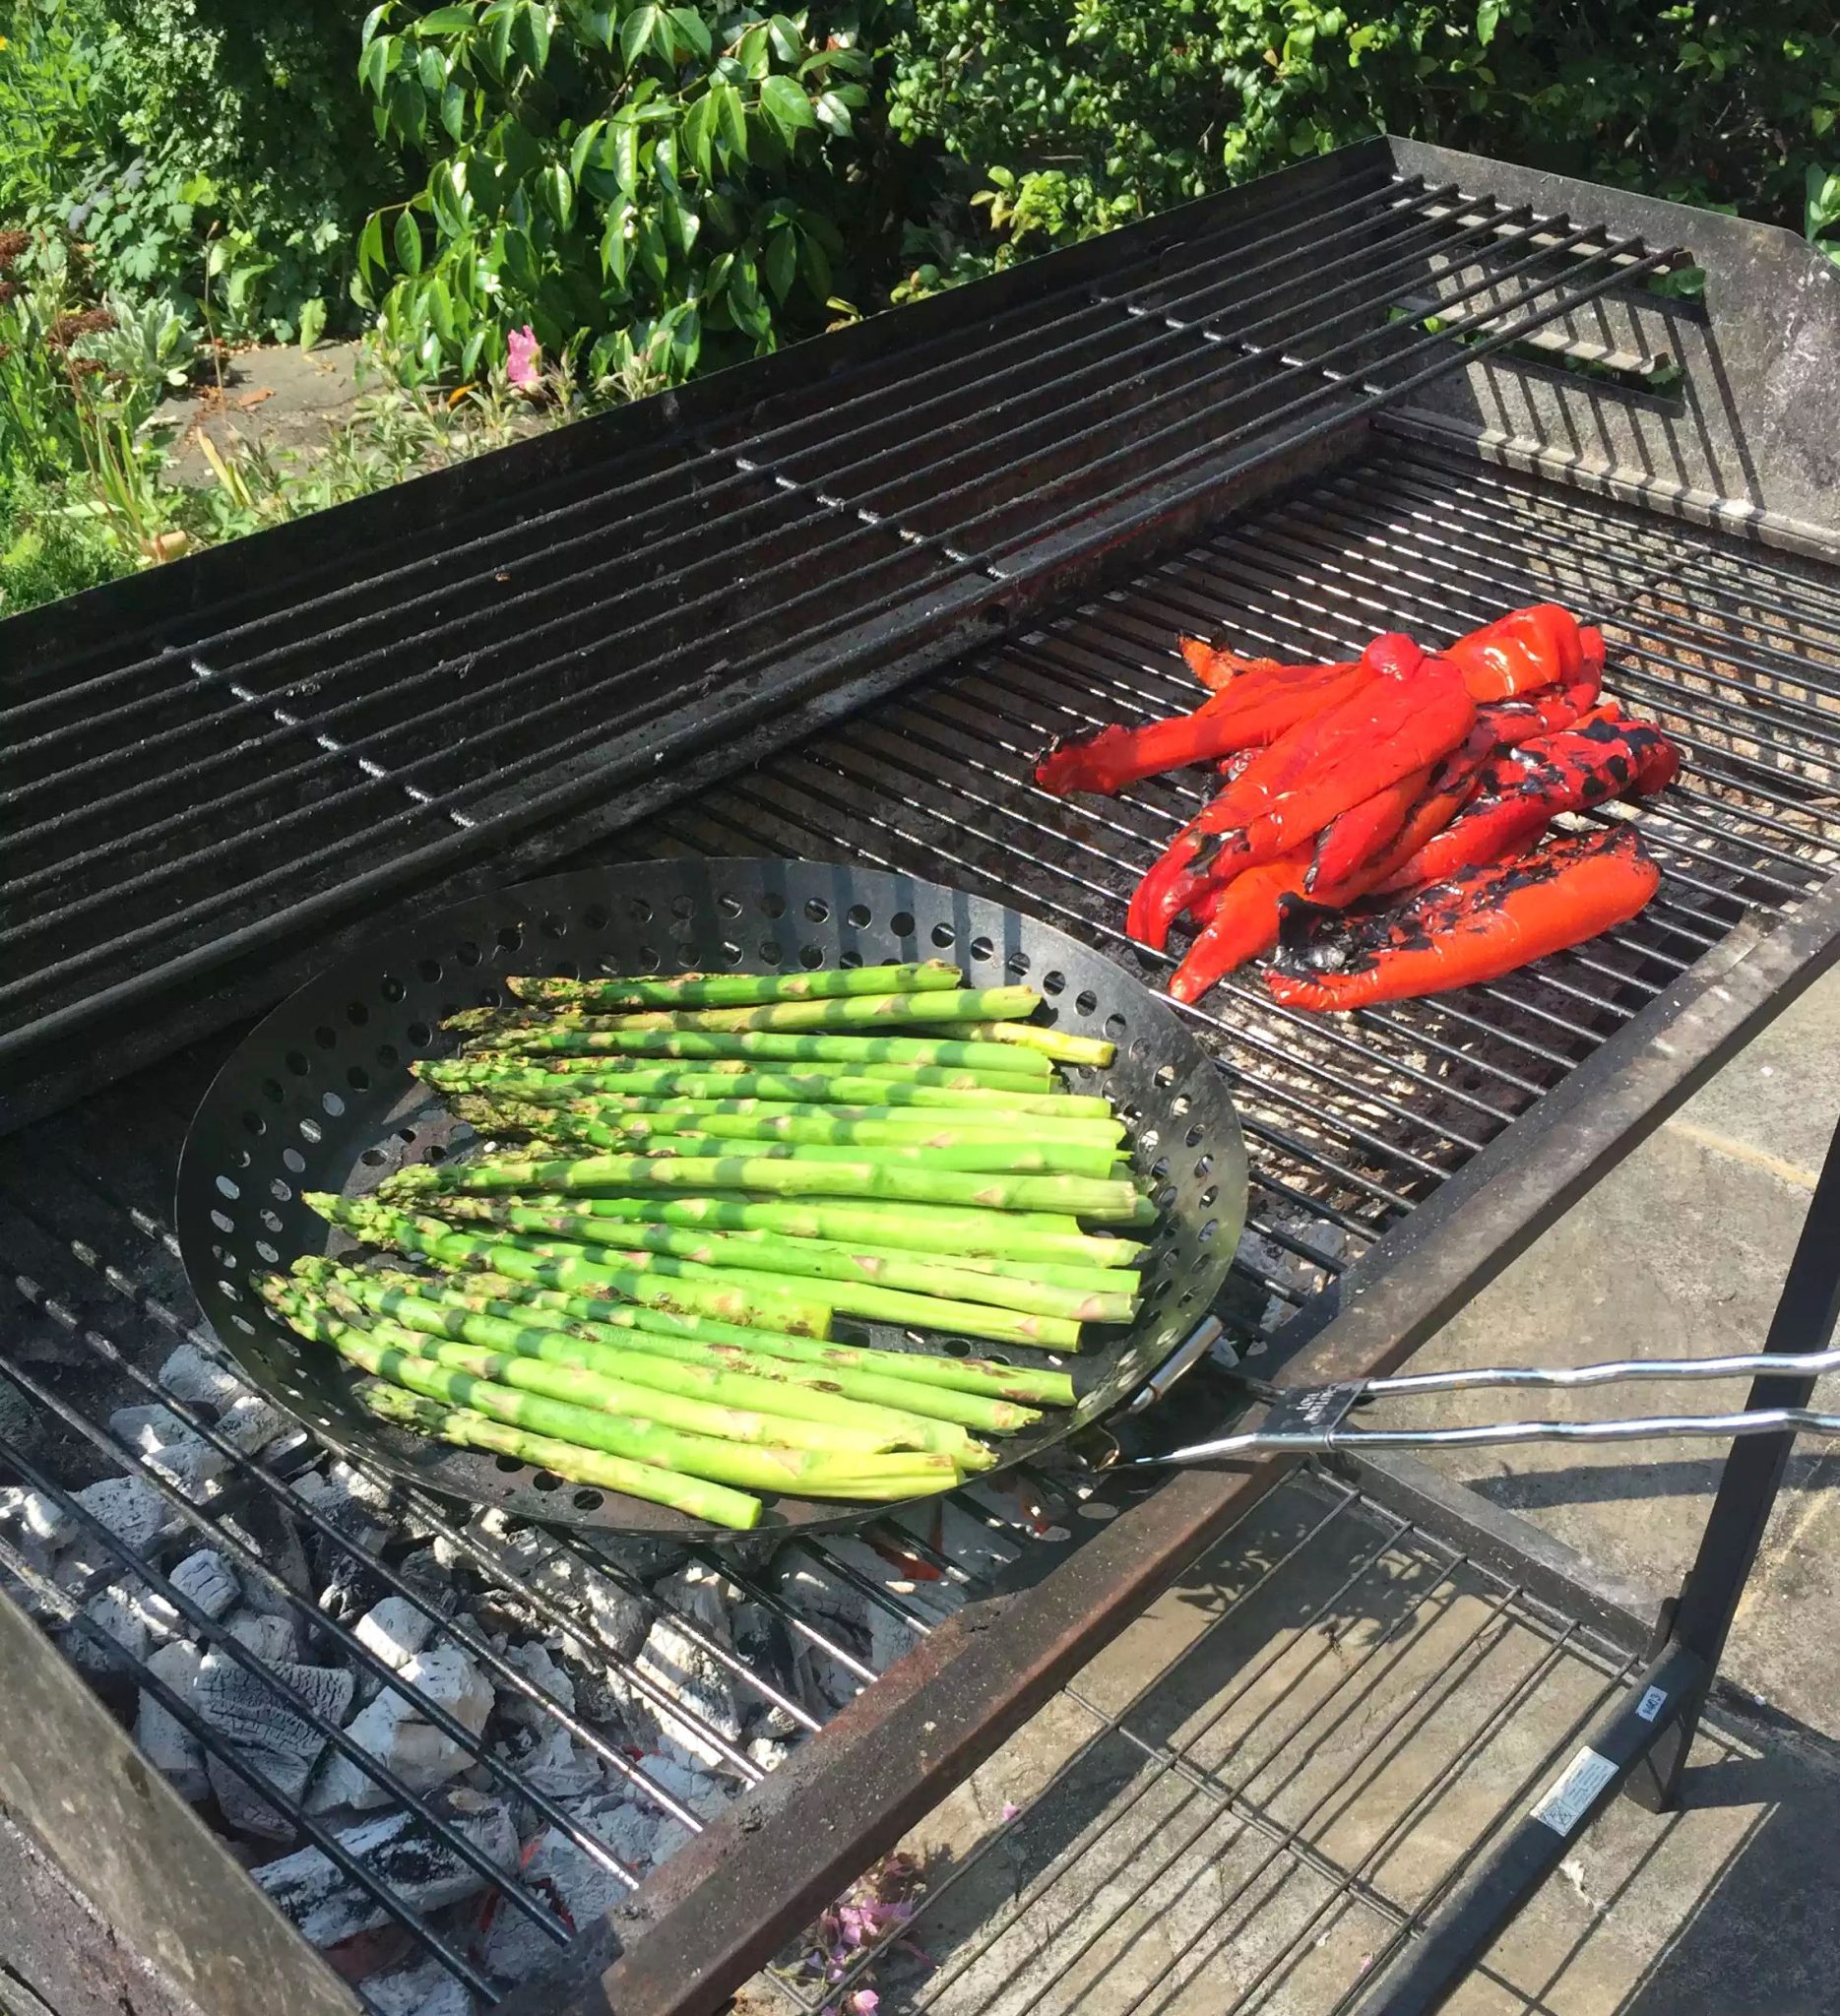 BBQ St Albans Sunshine Garden Outdoors Burgers Asparagus Peppers Lamb Sausages Salad Cheese Strawberries Mango Wine